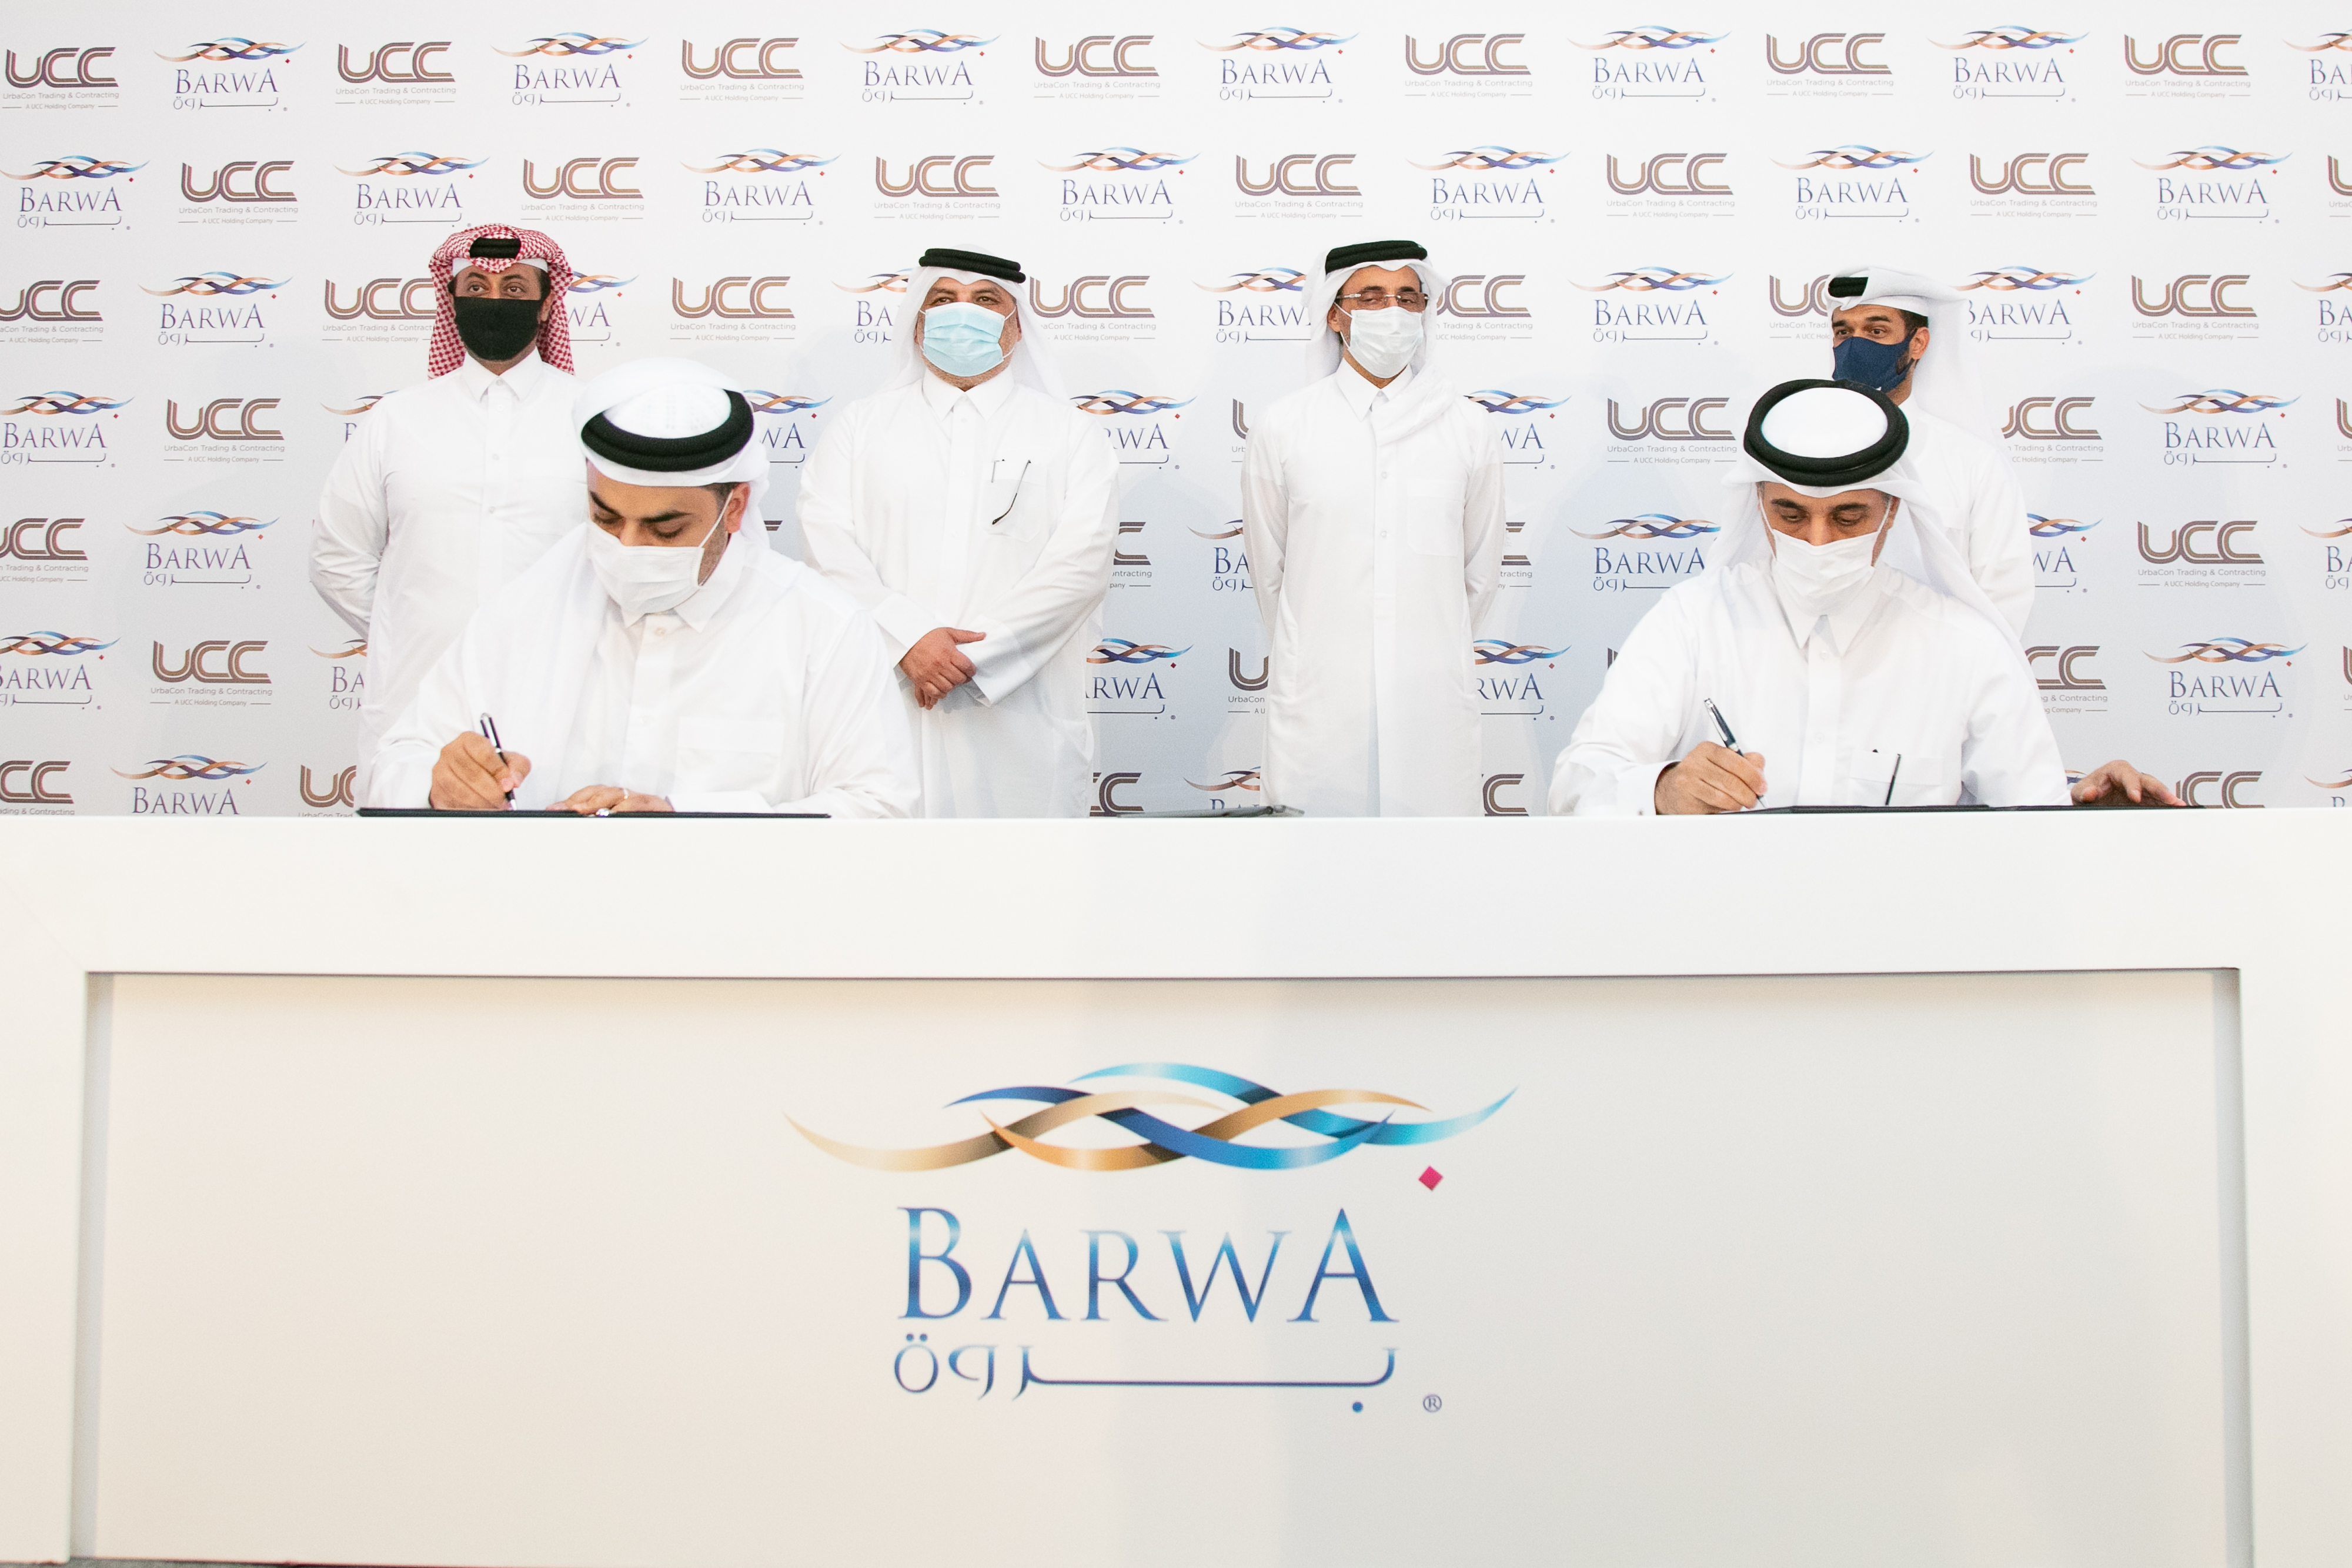 IN THE PRESENCE OF H.E. SALAH BIN GHANEM AL ALI, H.E MR. HASSAN AL THAWADI AND H.E. DR. ENG. SAAD BIN AHMAD AL MUHANNADI,  BARWA REAL ESTATE LAUNCHED CONSTRUCTION WORKS OF  “MADINATNA” & “BARAHAT AL JANOUB”   AND AWARDED UCC TO IMPLEMENT PROJECT